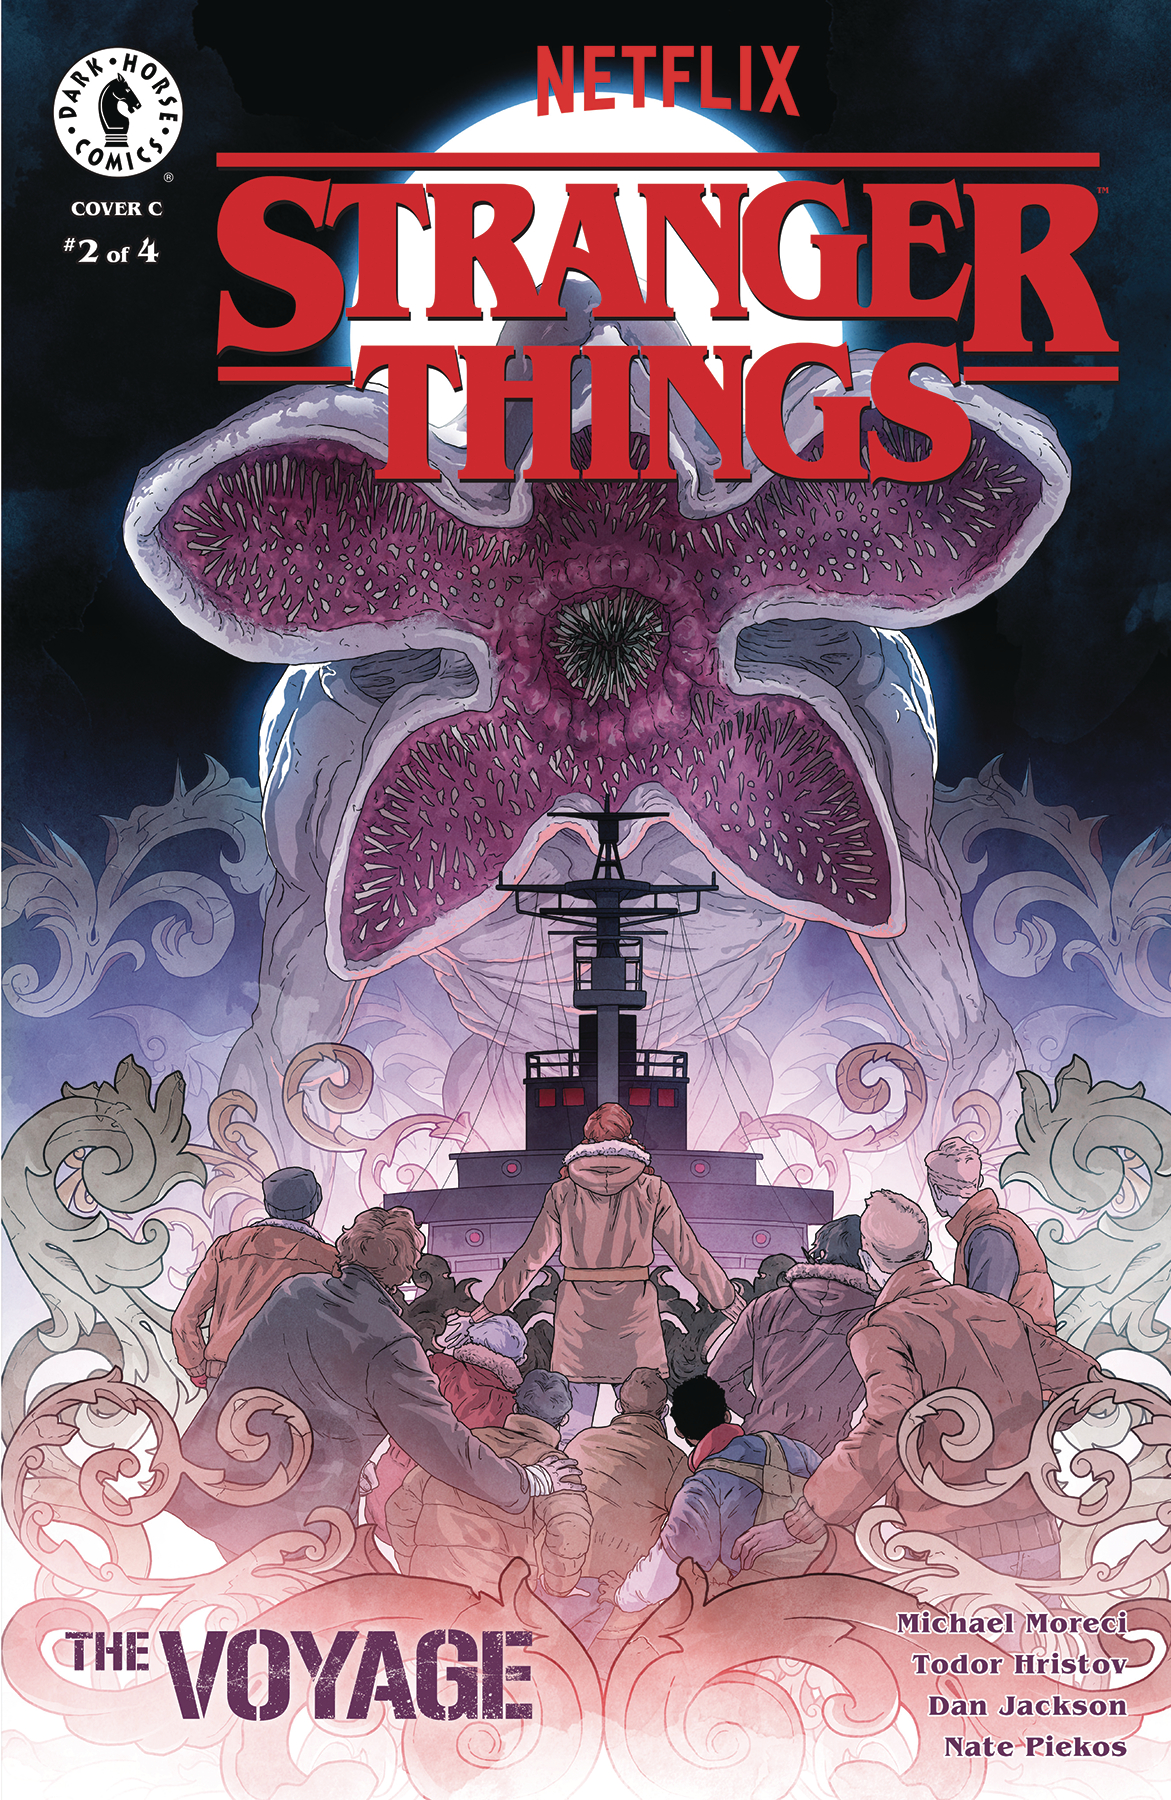 Stranger Things: The Voyage #2 Cover C (Danny Luckert)